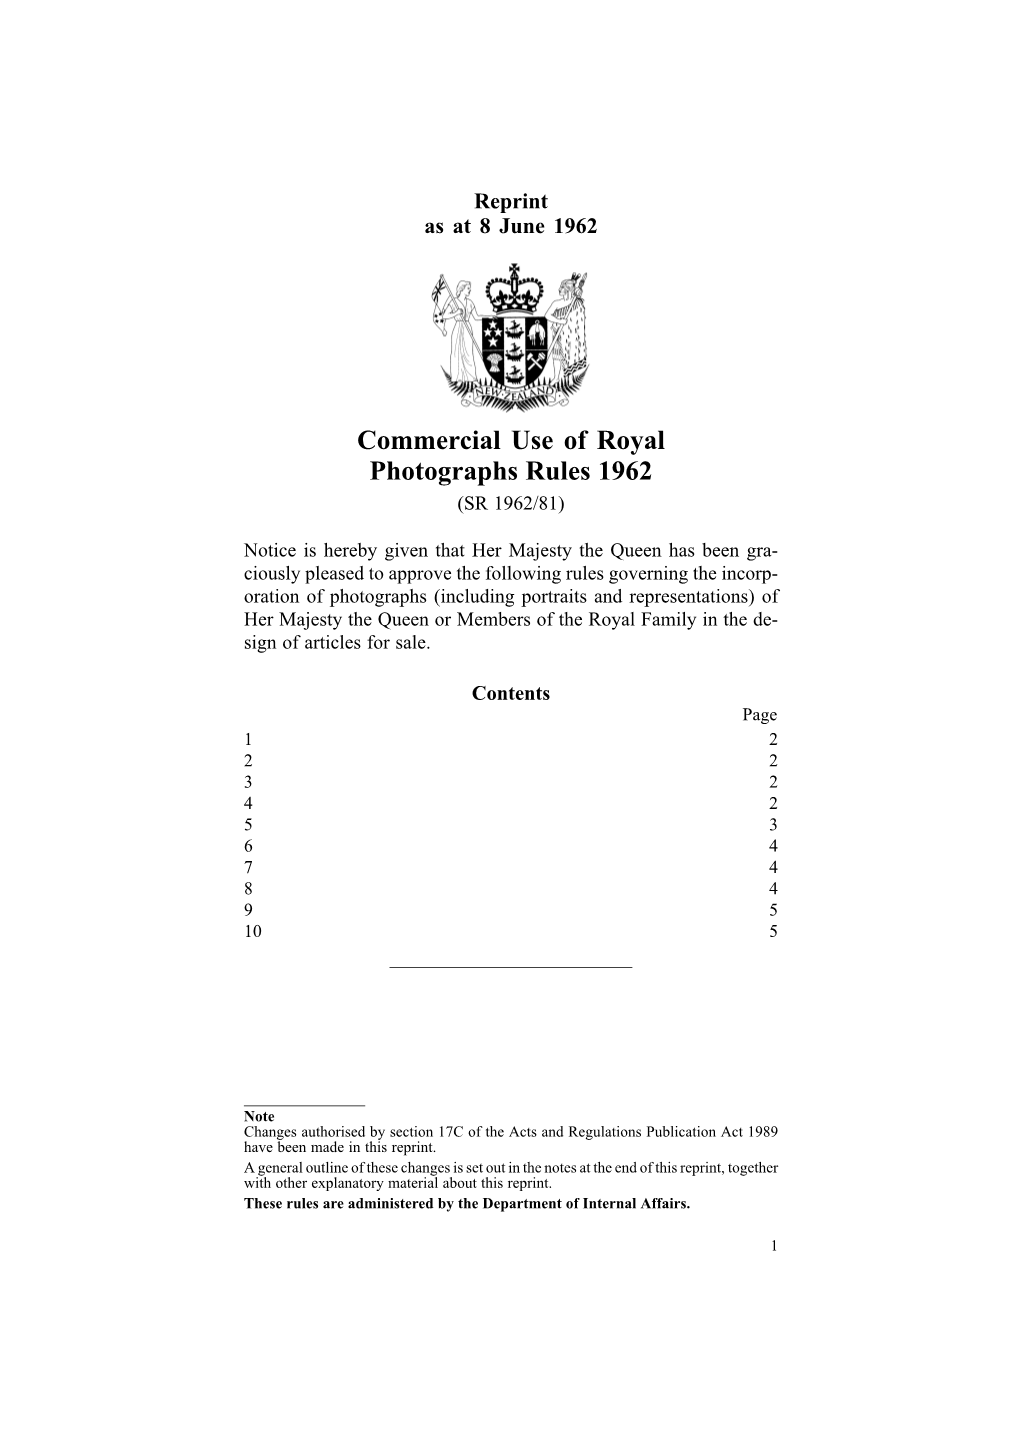 Commercial Use of Royal Photographs Rules 1962 (SR 1962/81)